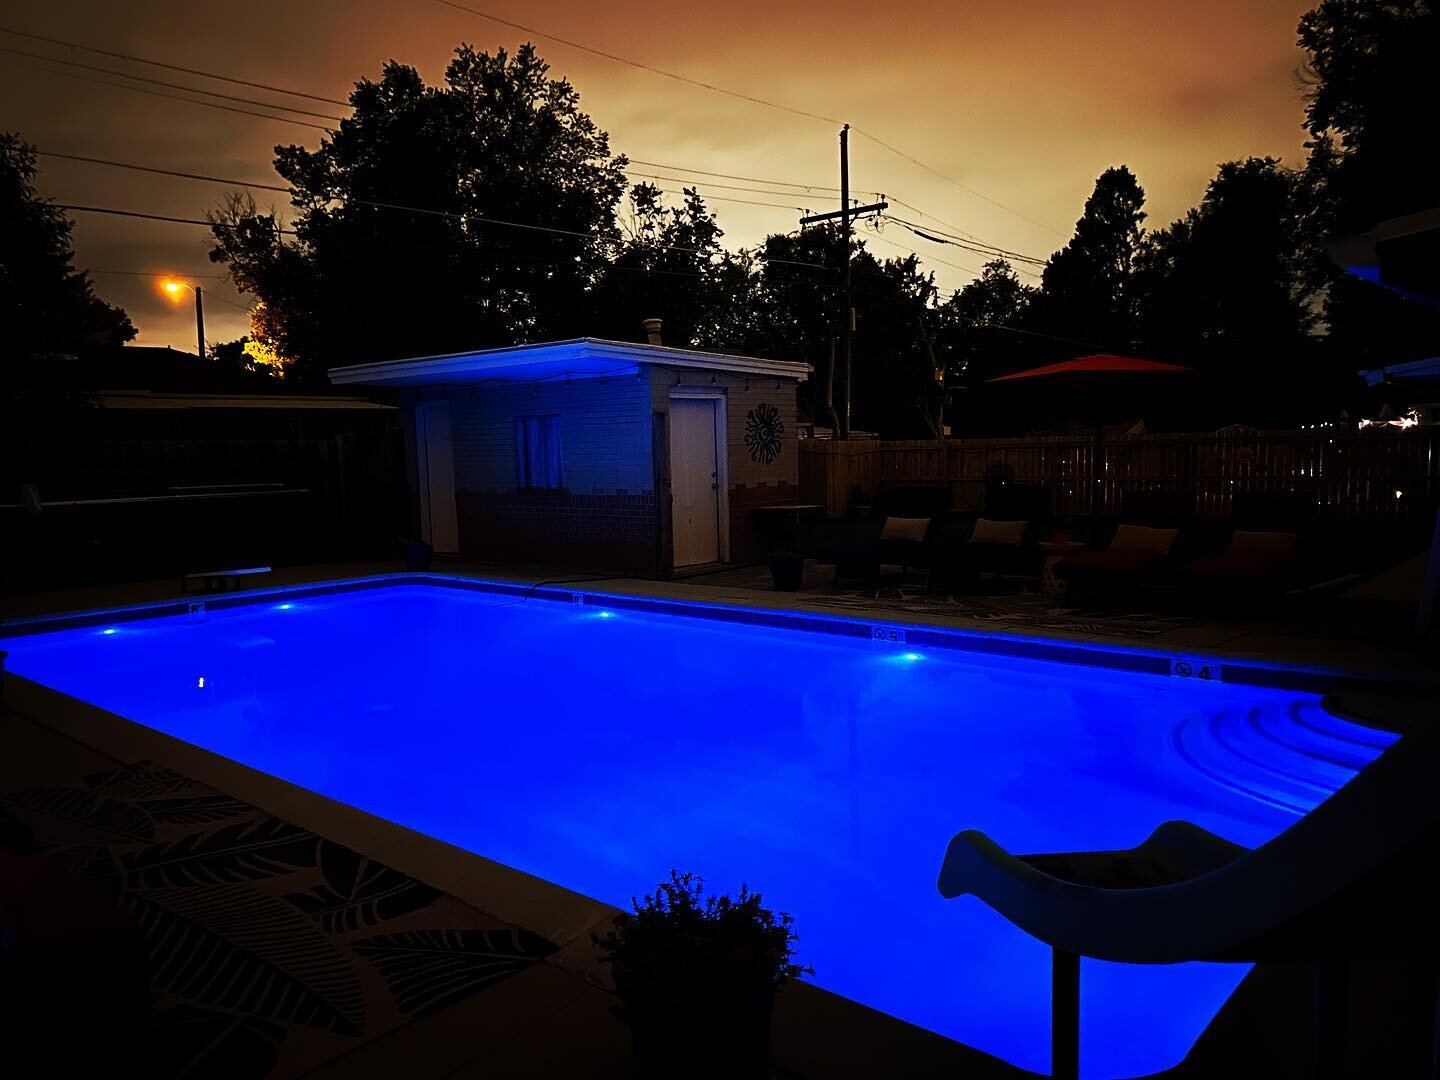 We are so excited, we added new pool lights so our guests can better enjoy those beautiful summer nights! ✨ #poolside #datenight #rentapool #coloradoliving #thingstodoindenver